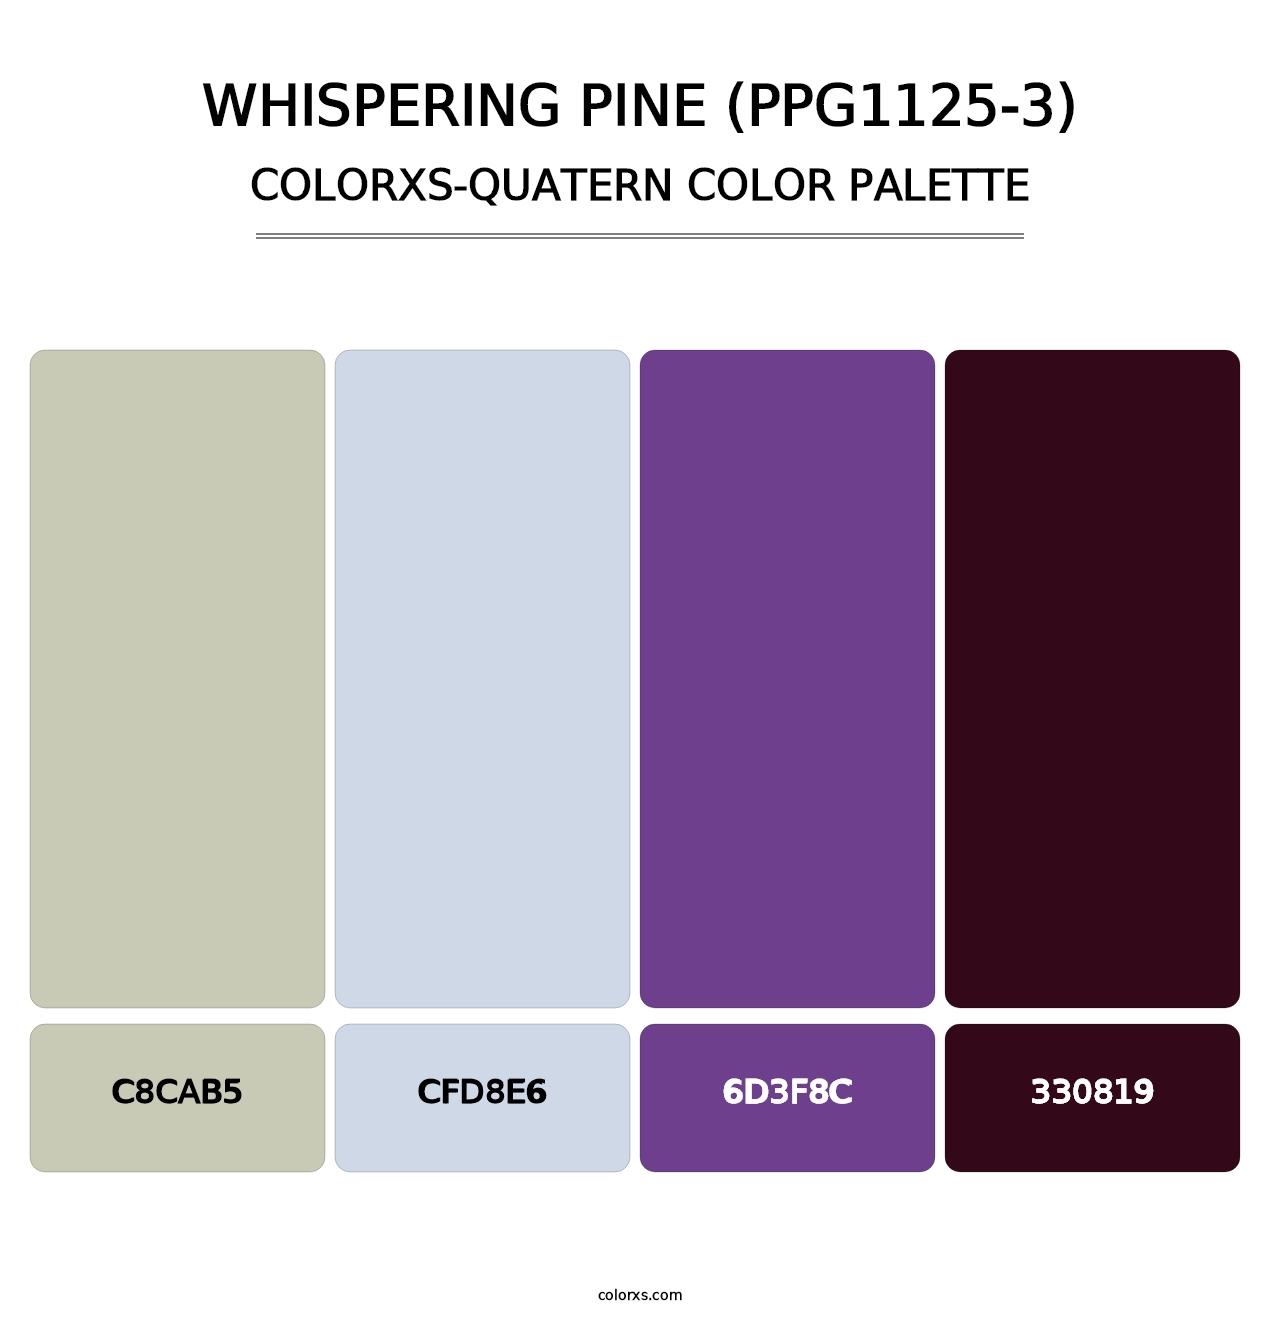 Whispering Pine (PPG1125-3) - Colorxs Quatern Palette